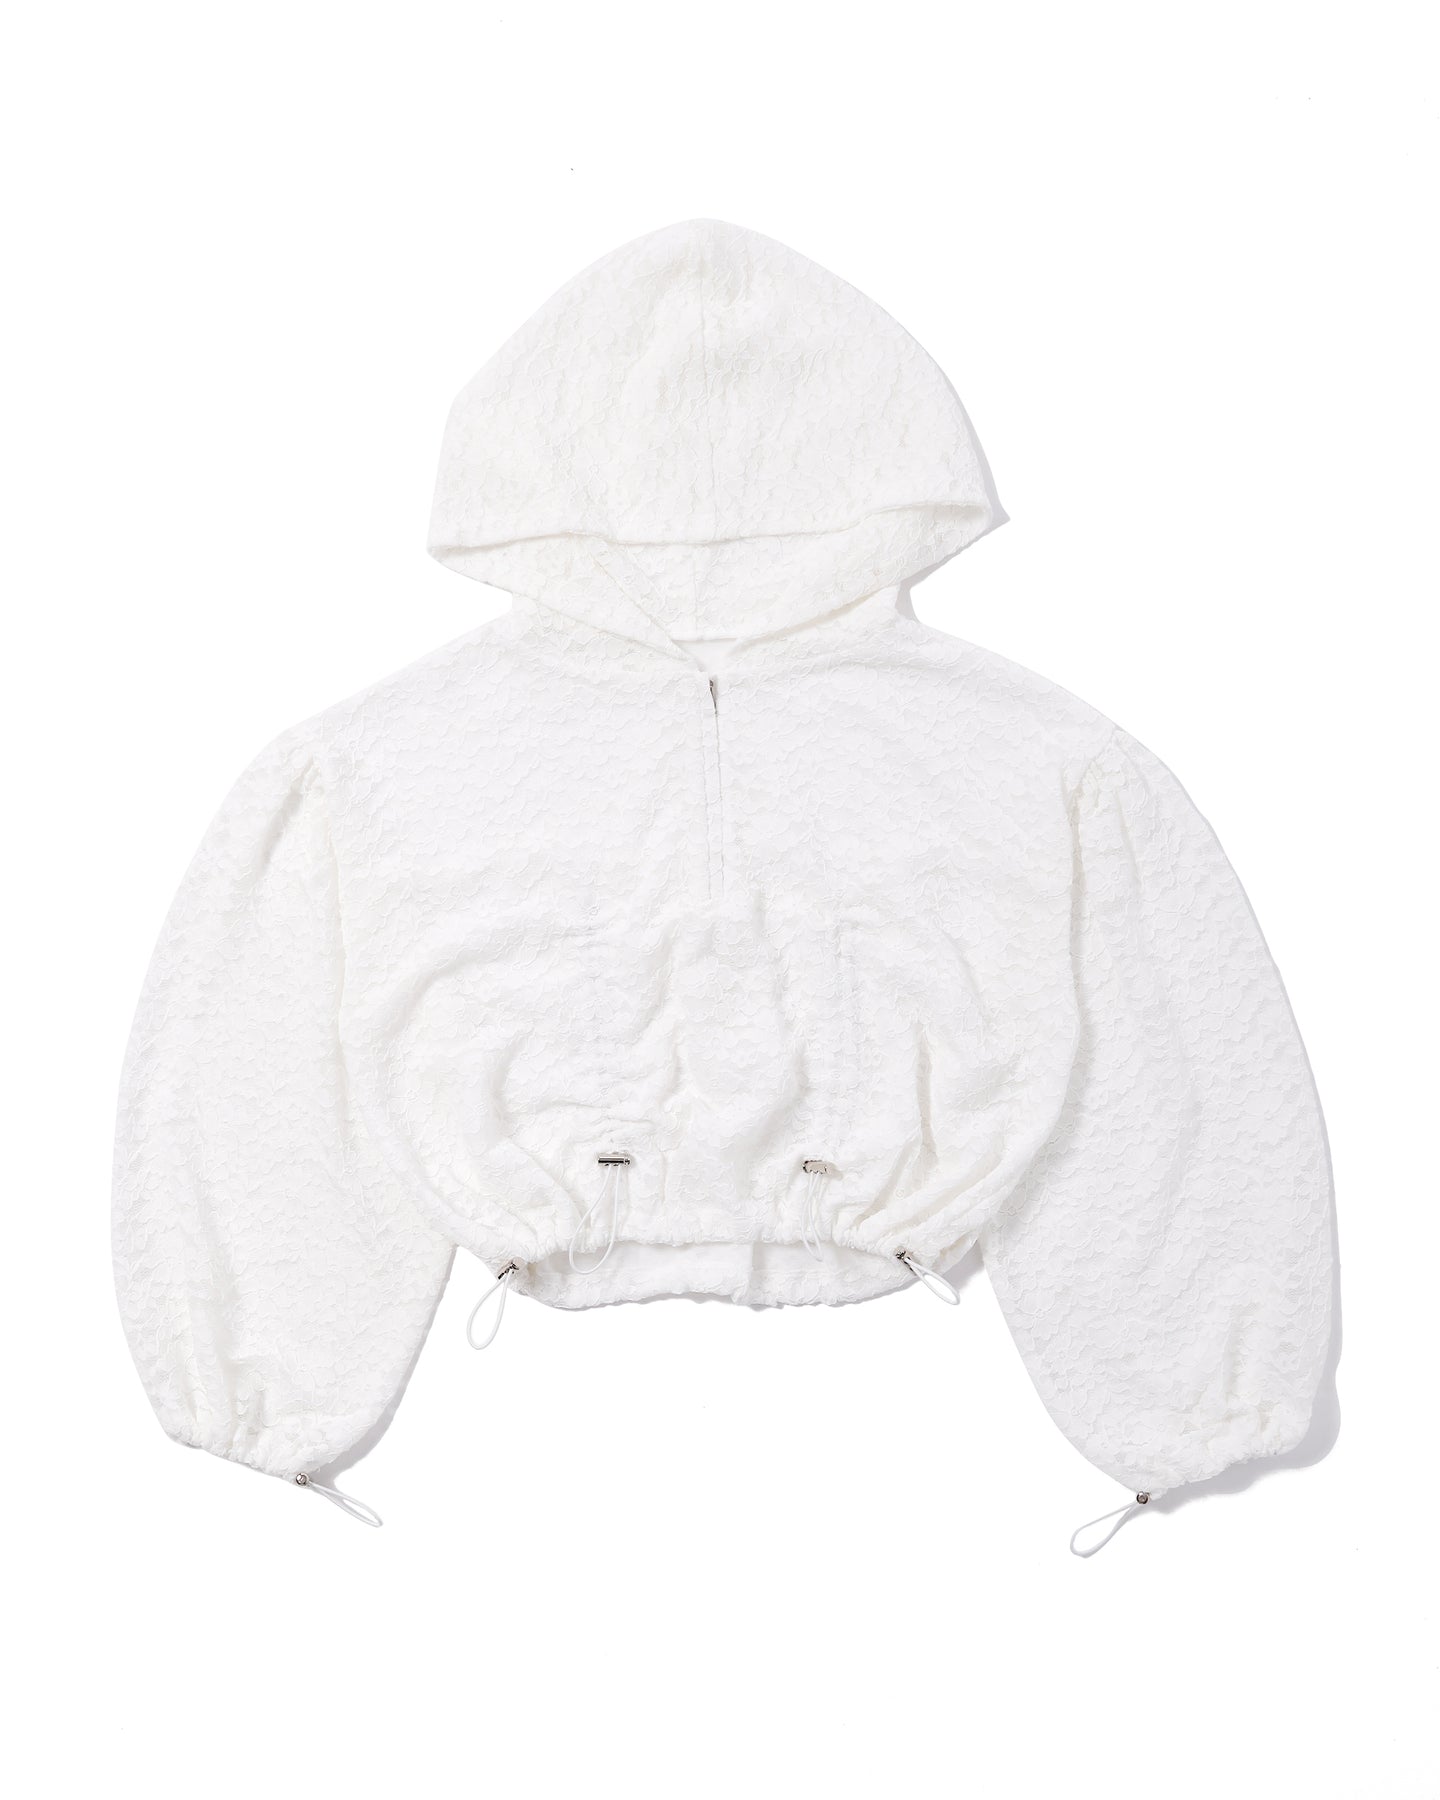 Cropped lacehoodie – POPPY